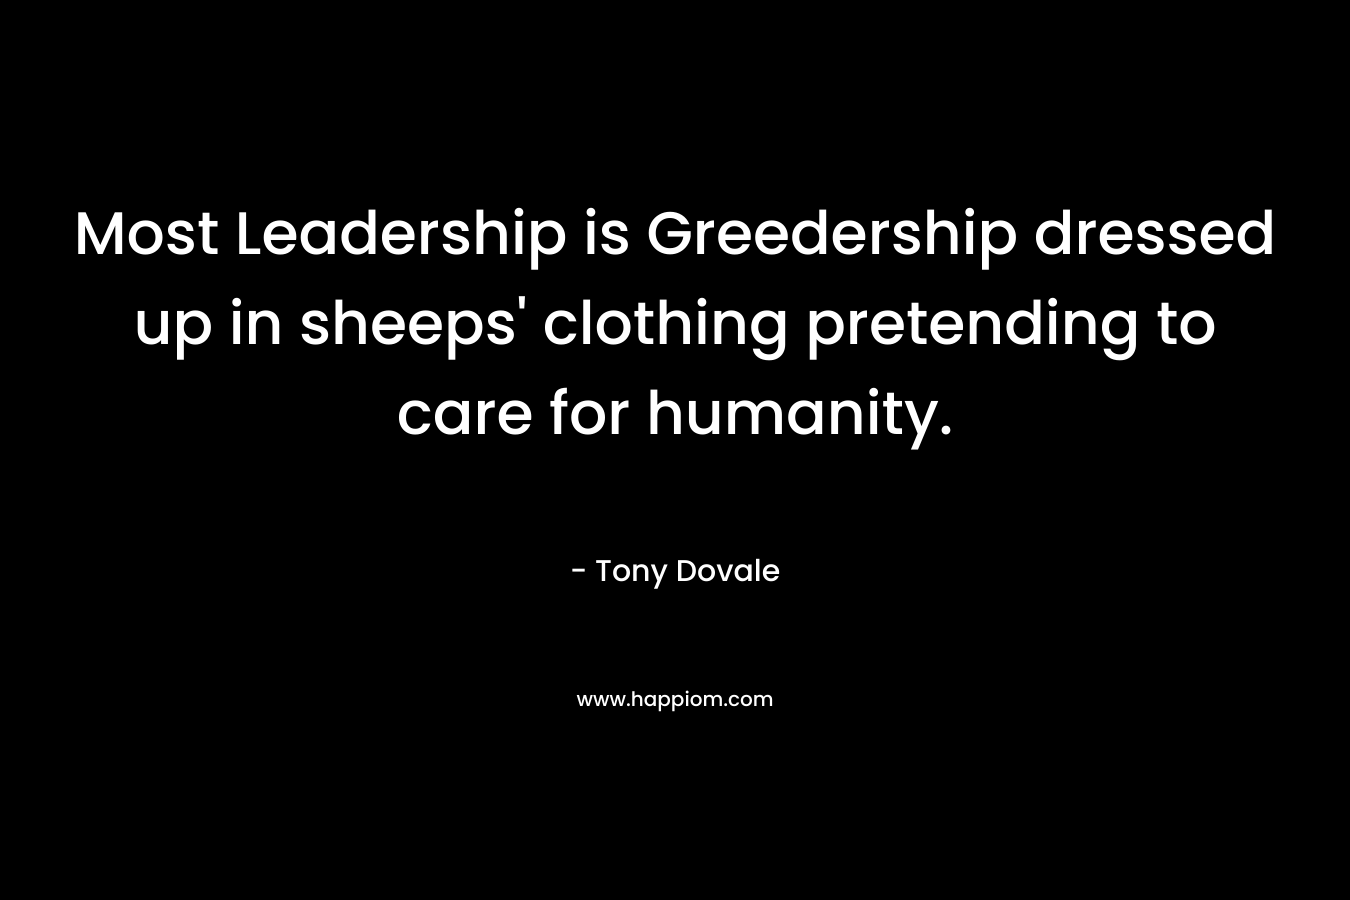 Most Leadership is Greedership dressed up in sheeps' clothing pretending to care for humanity.